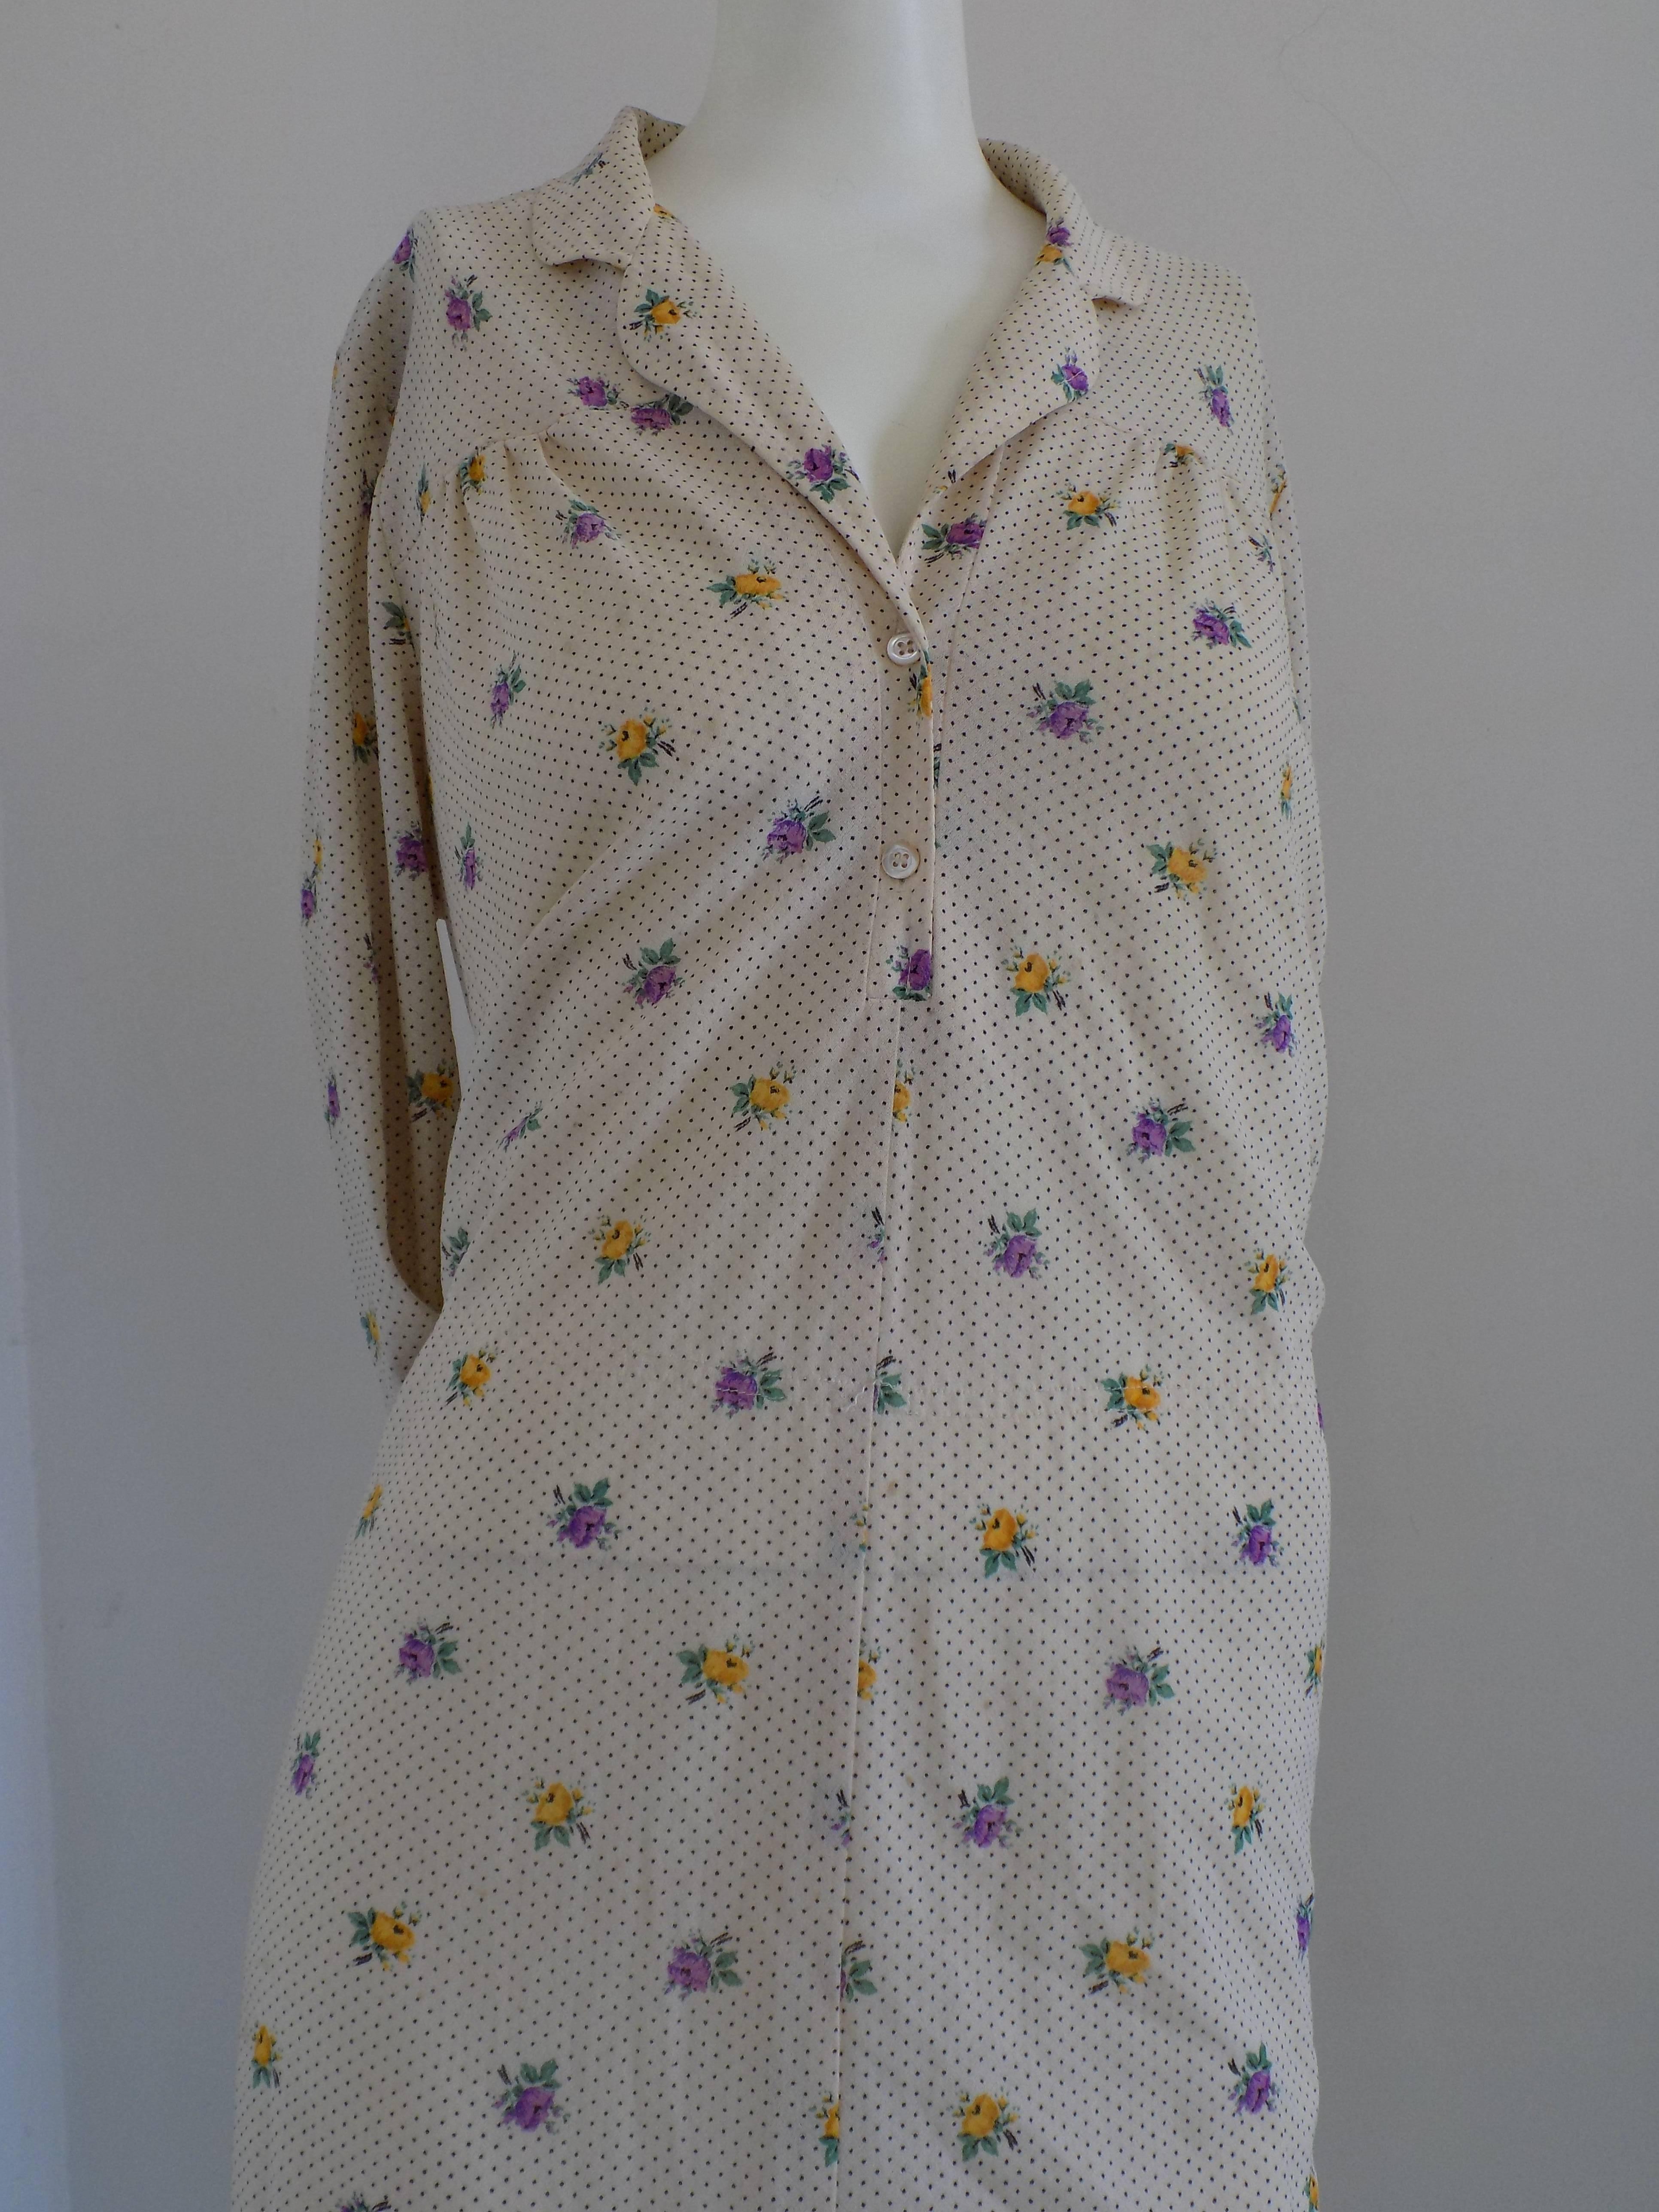 1980s Long Cream with flower Dress
composition: Cotton and acetate